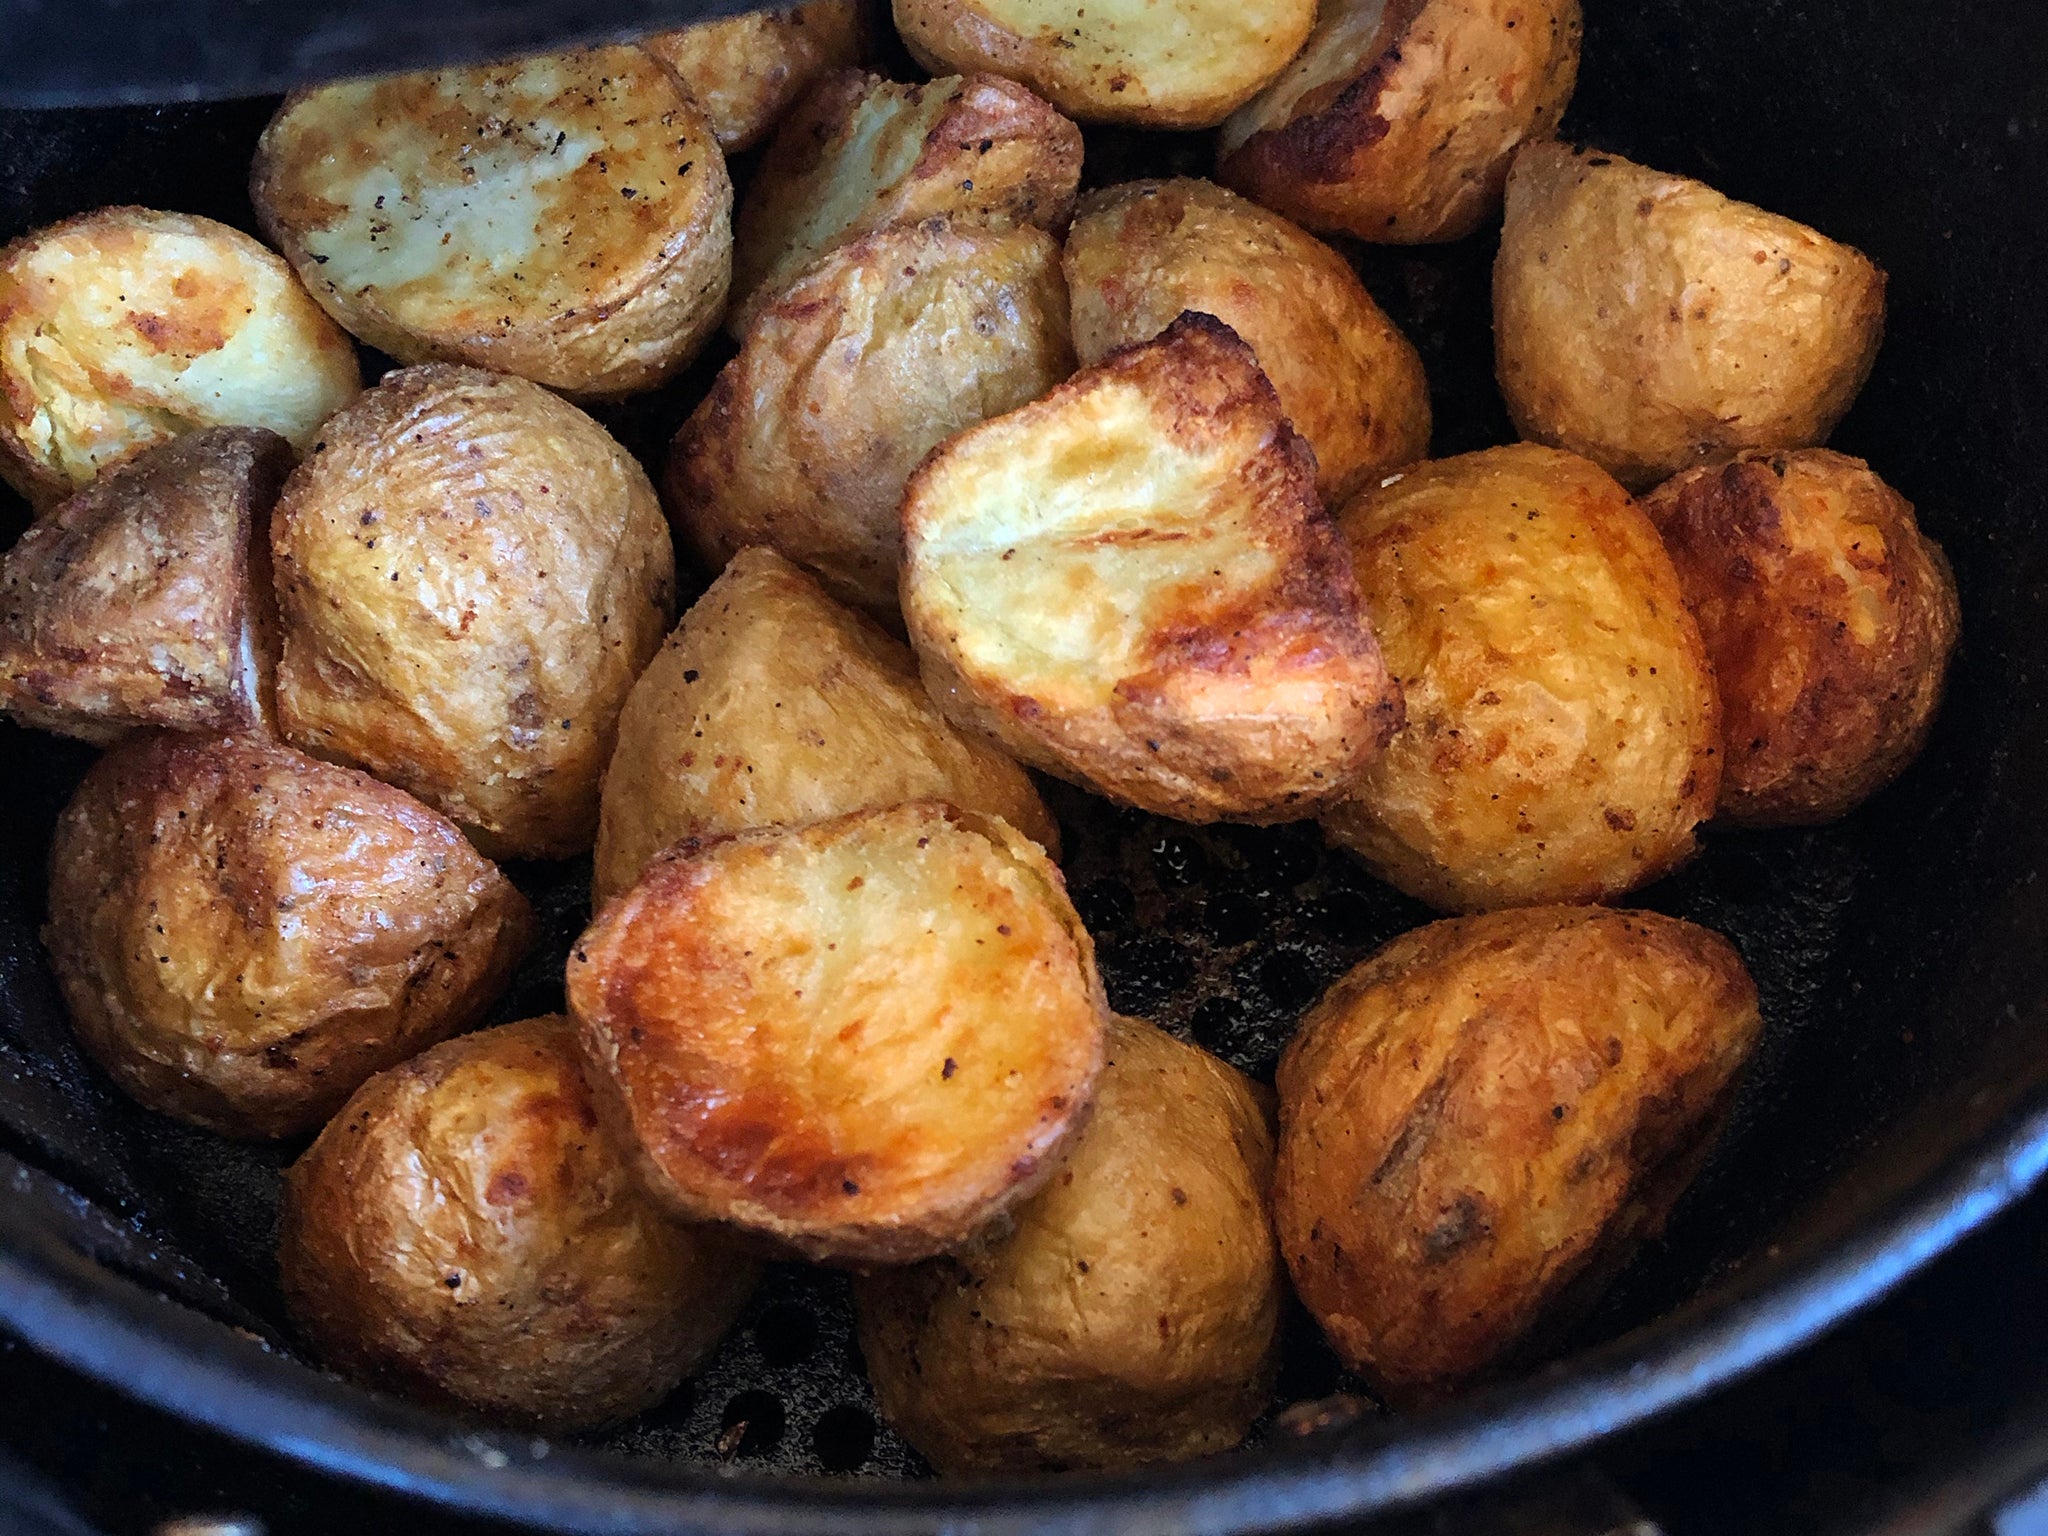 Crispy roasted potatoes seasoned with rosemary and garlic, fresh from the fryer